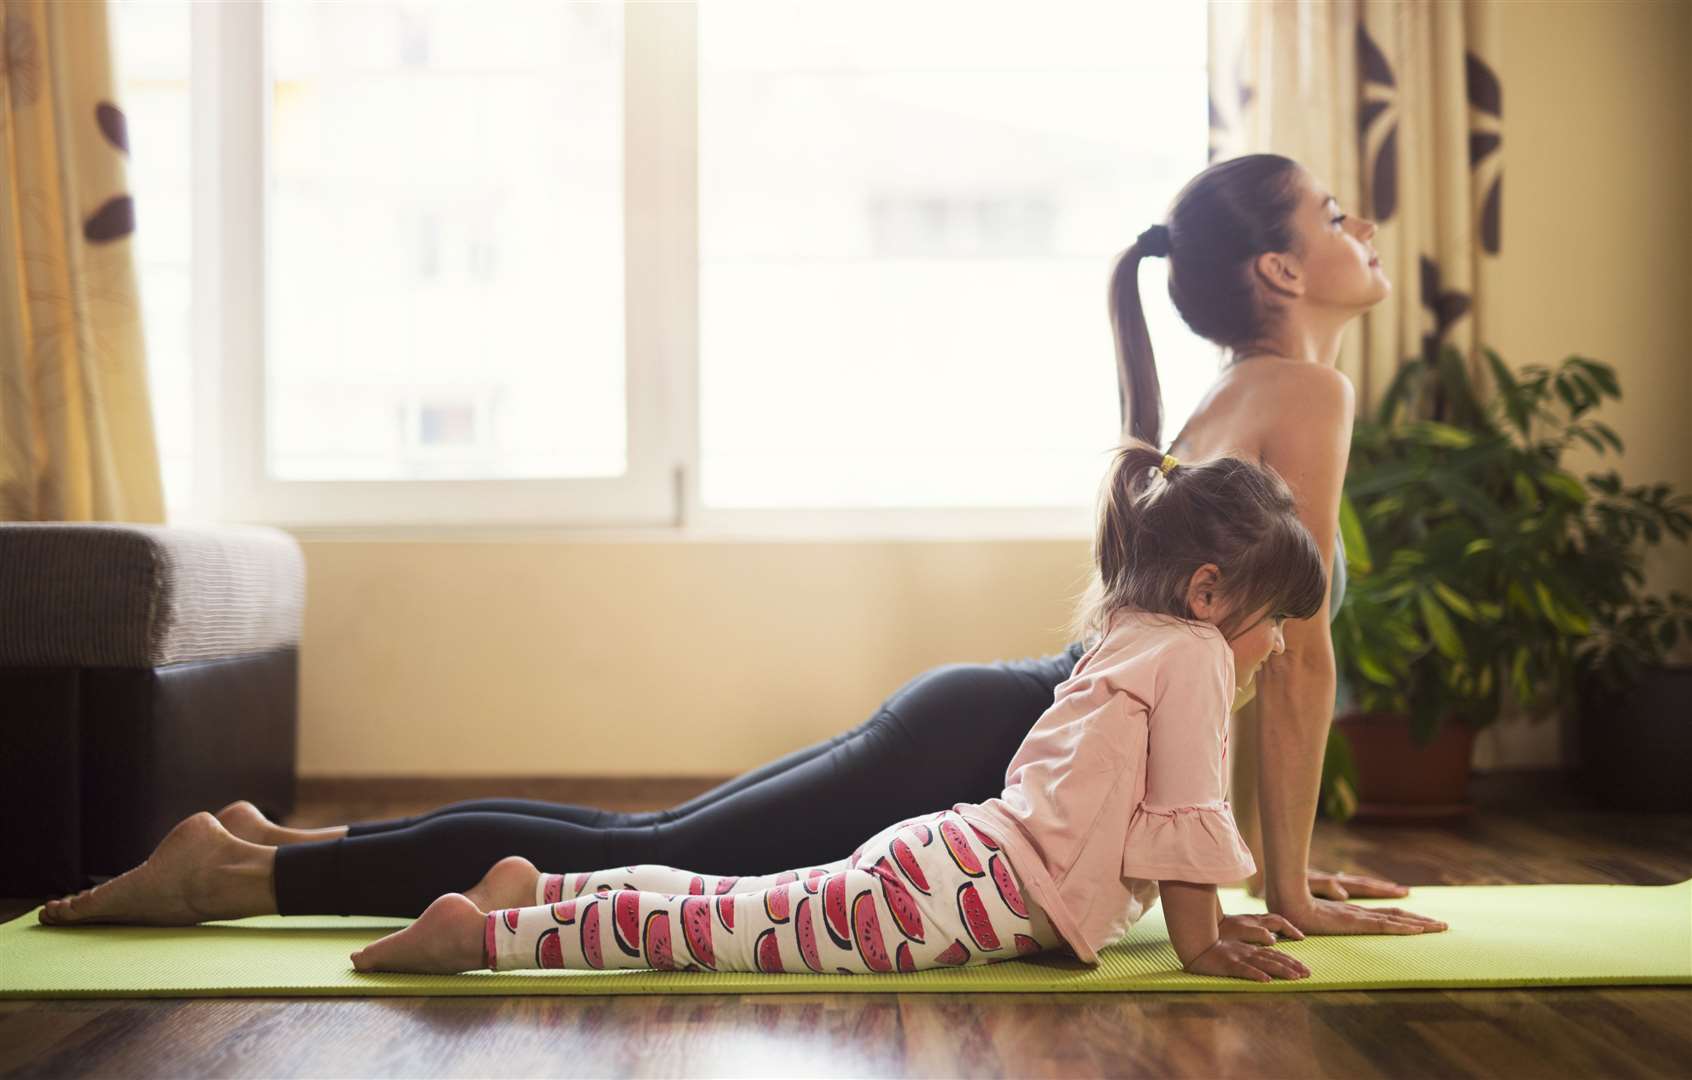 You can take up yoga while at home